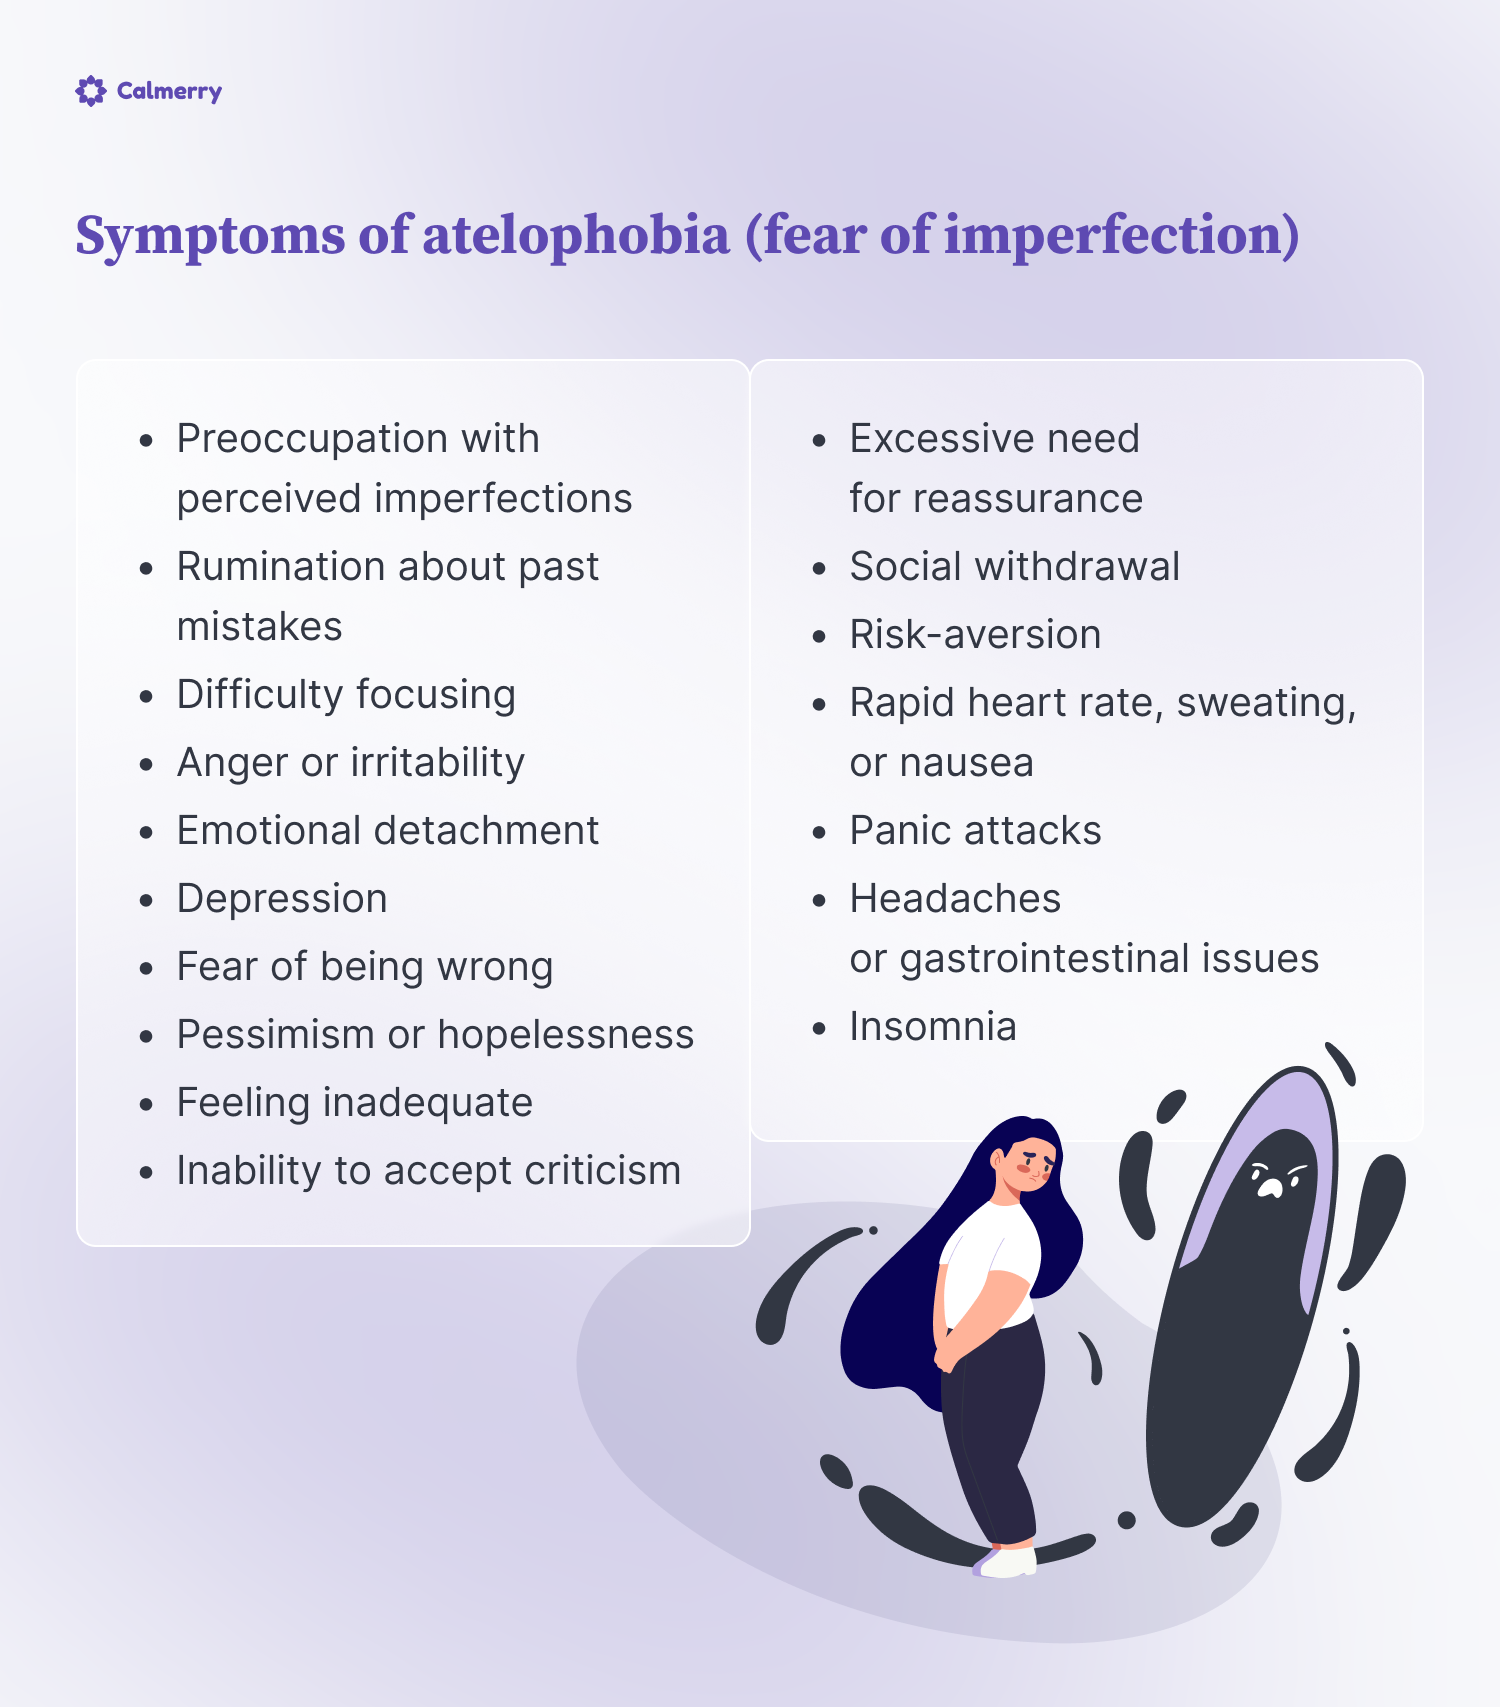 Symptoms of atelophobia (fear of imperfection)
Preoccupation with perceived imperfections
Rumination about past mistakes
Difficulty focusing
Anger or irritability
Emotional detachment
Depression
Fear of being wrong
Pessimism or hopelessness
Feeling inadequate
Inability to accept criticism
Excessive need for reassurance
Social withdrawal
Risk-aversion
Rapid heart rate, sweating, or nausea
Panic attacks
Headaches or gastrointestinal issues 
Insomnia